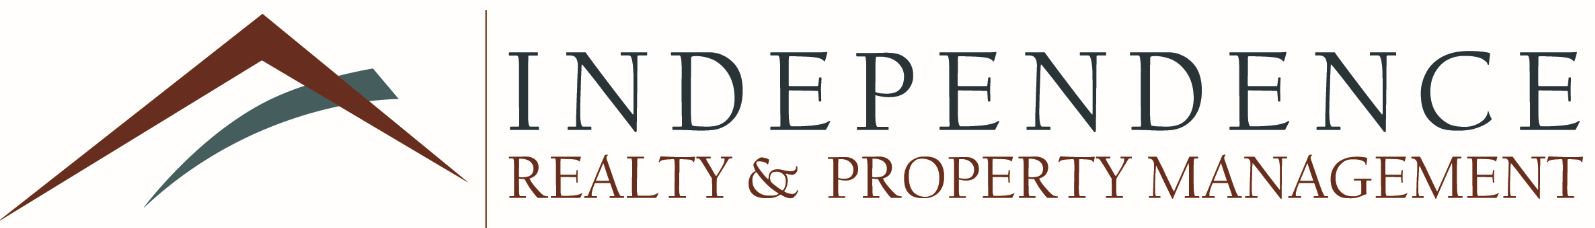 Independence Realty & Property Management